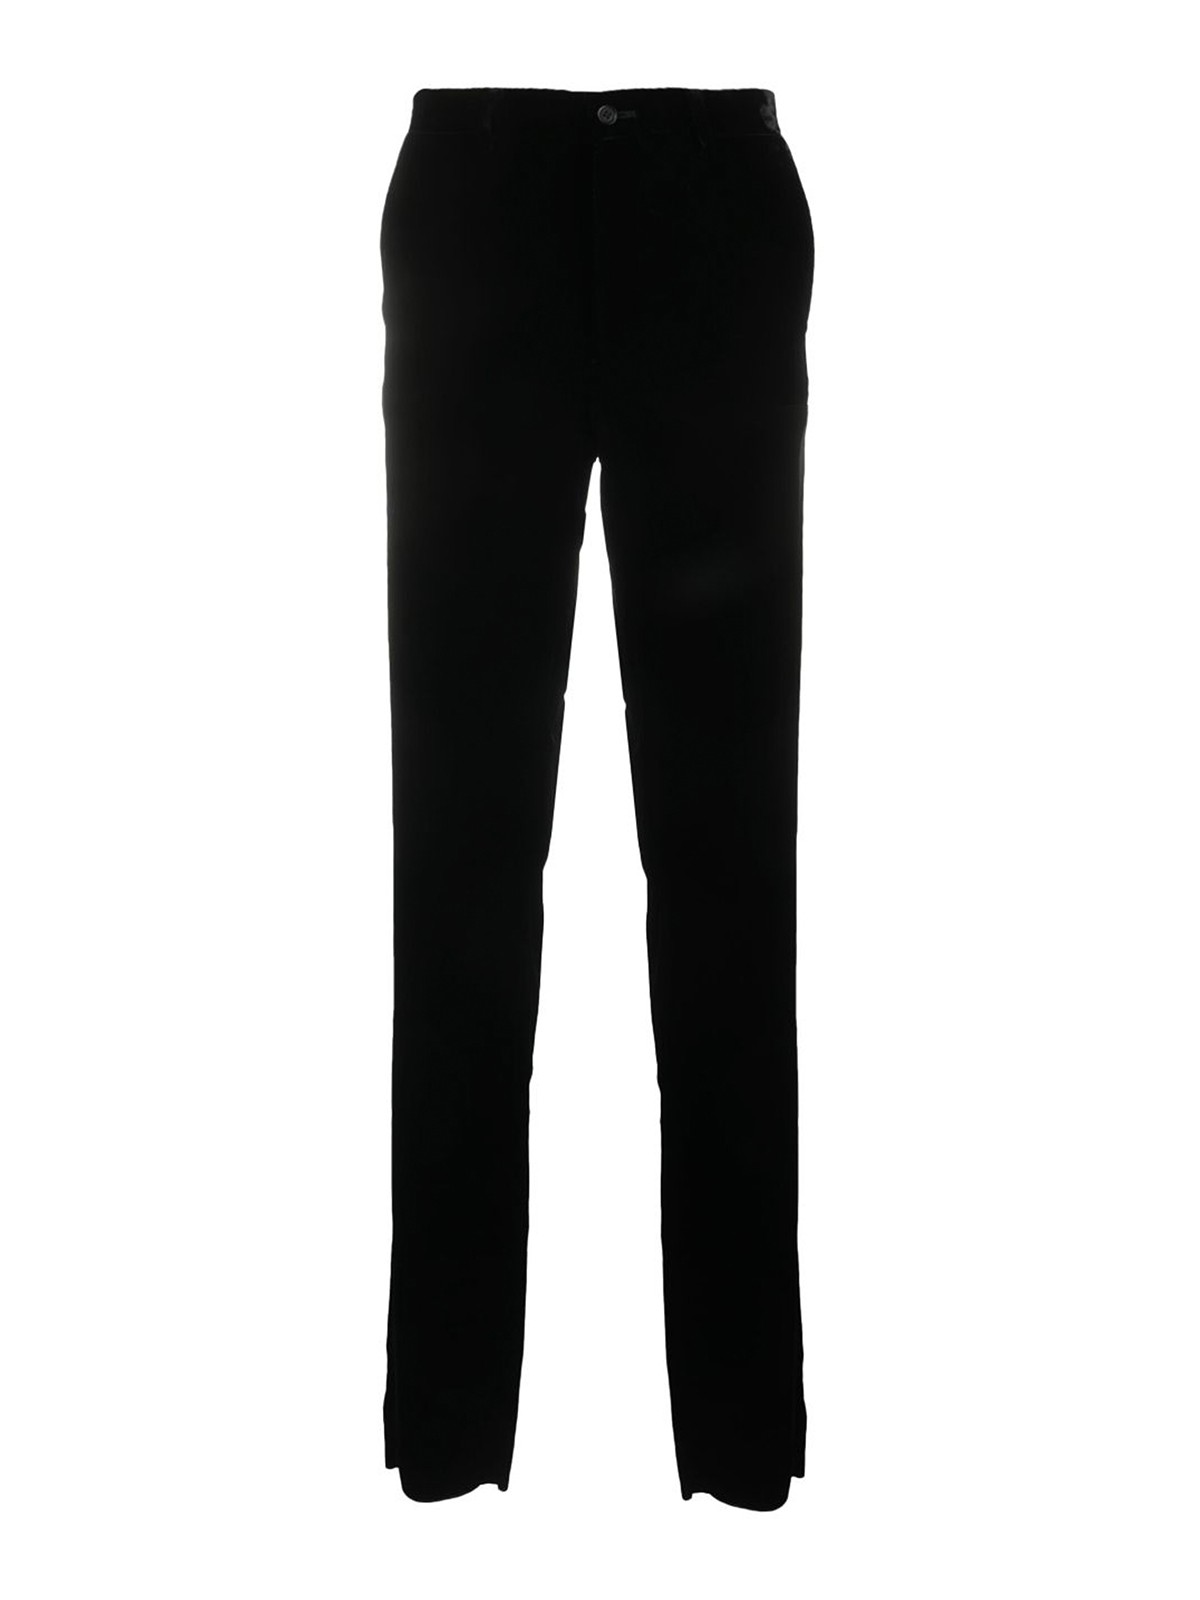 Giorgio Armani Pleated-Front Pale-Grey Satin Suit Pants